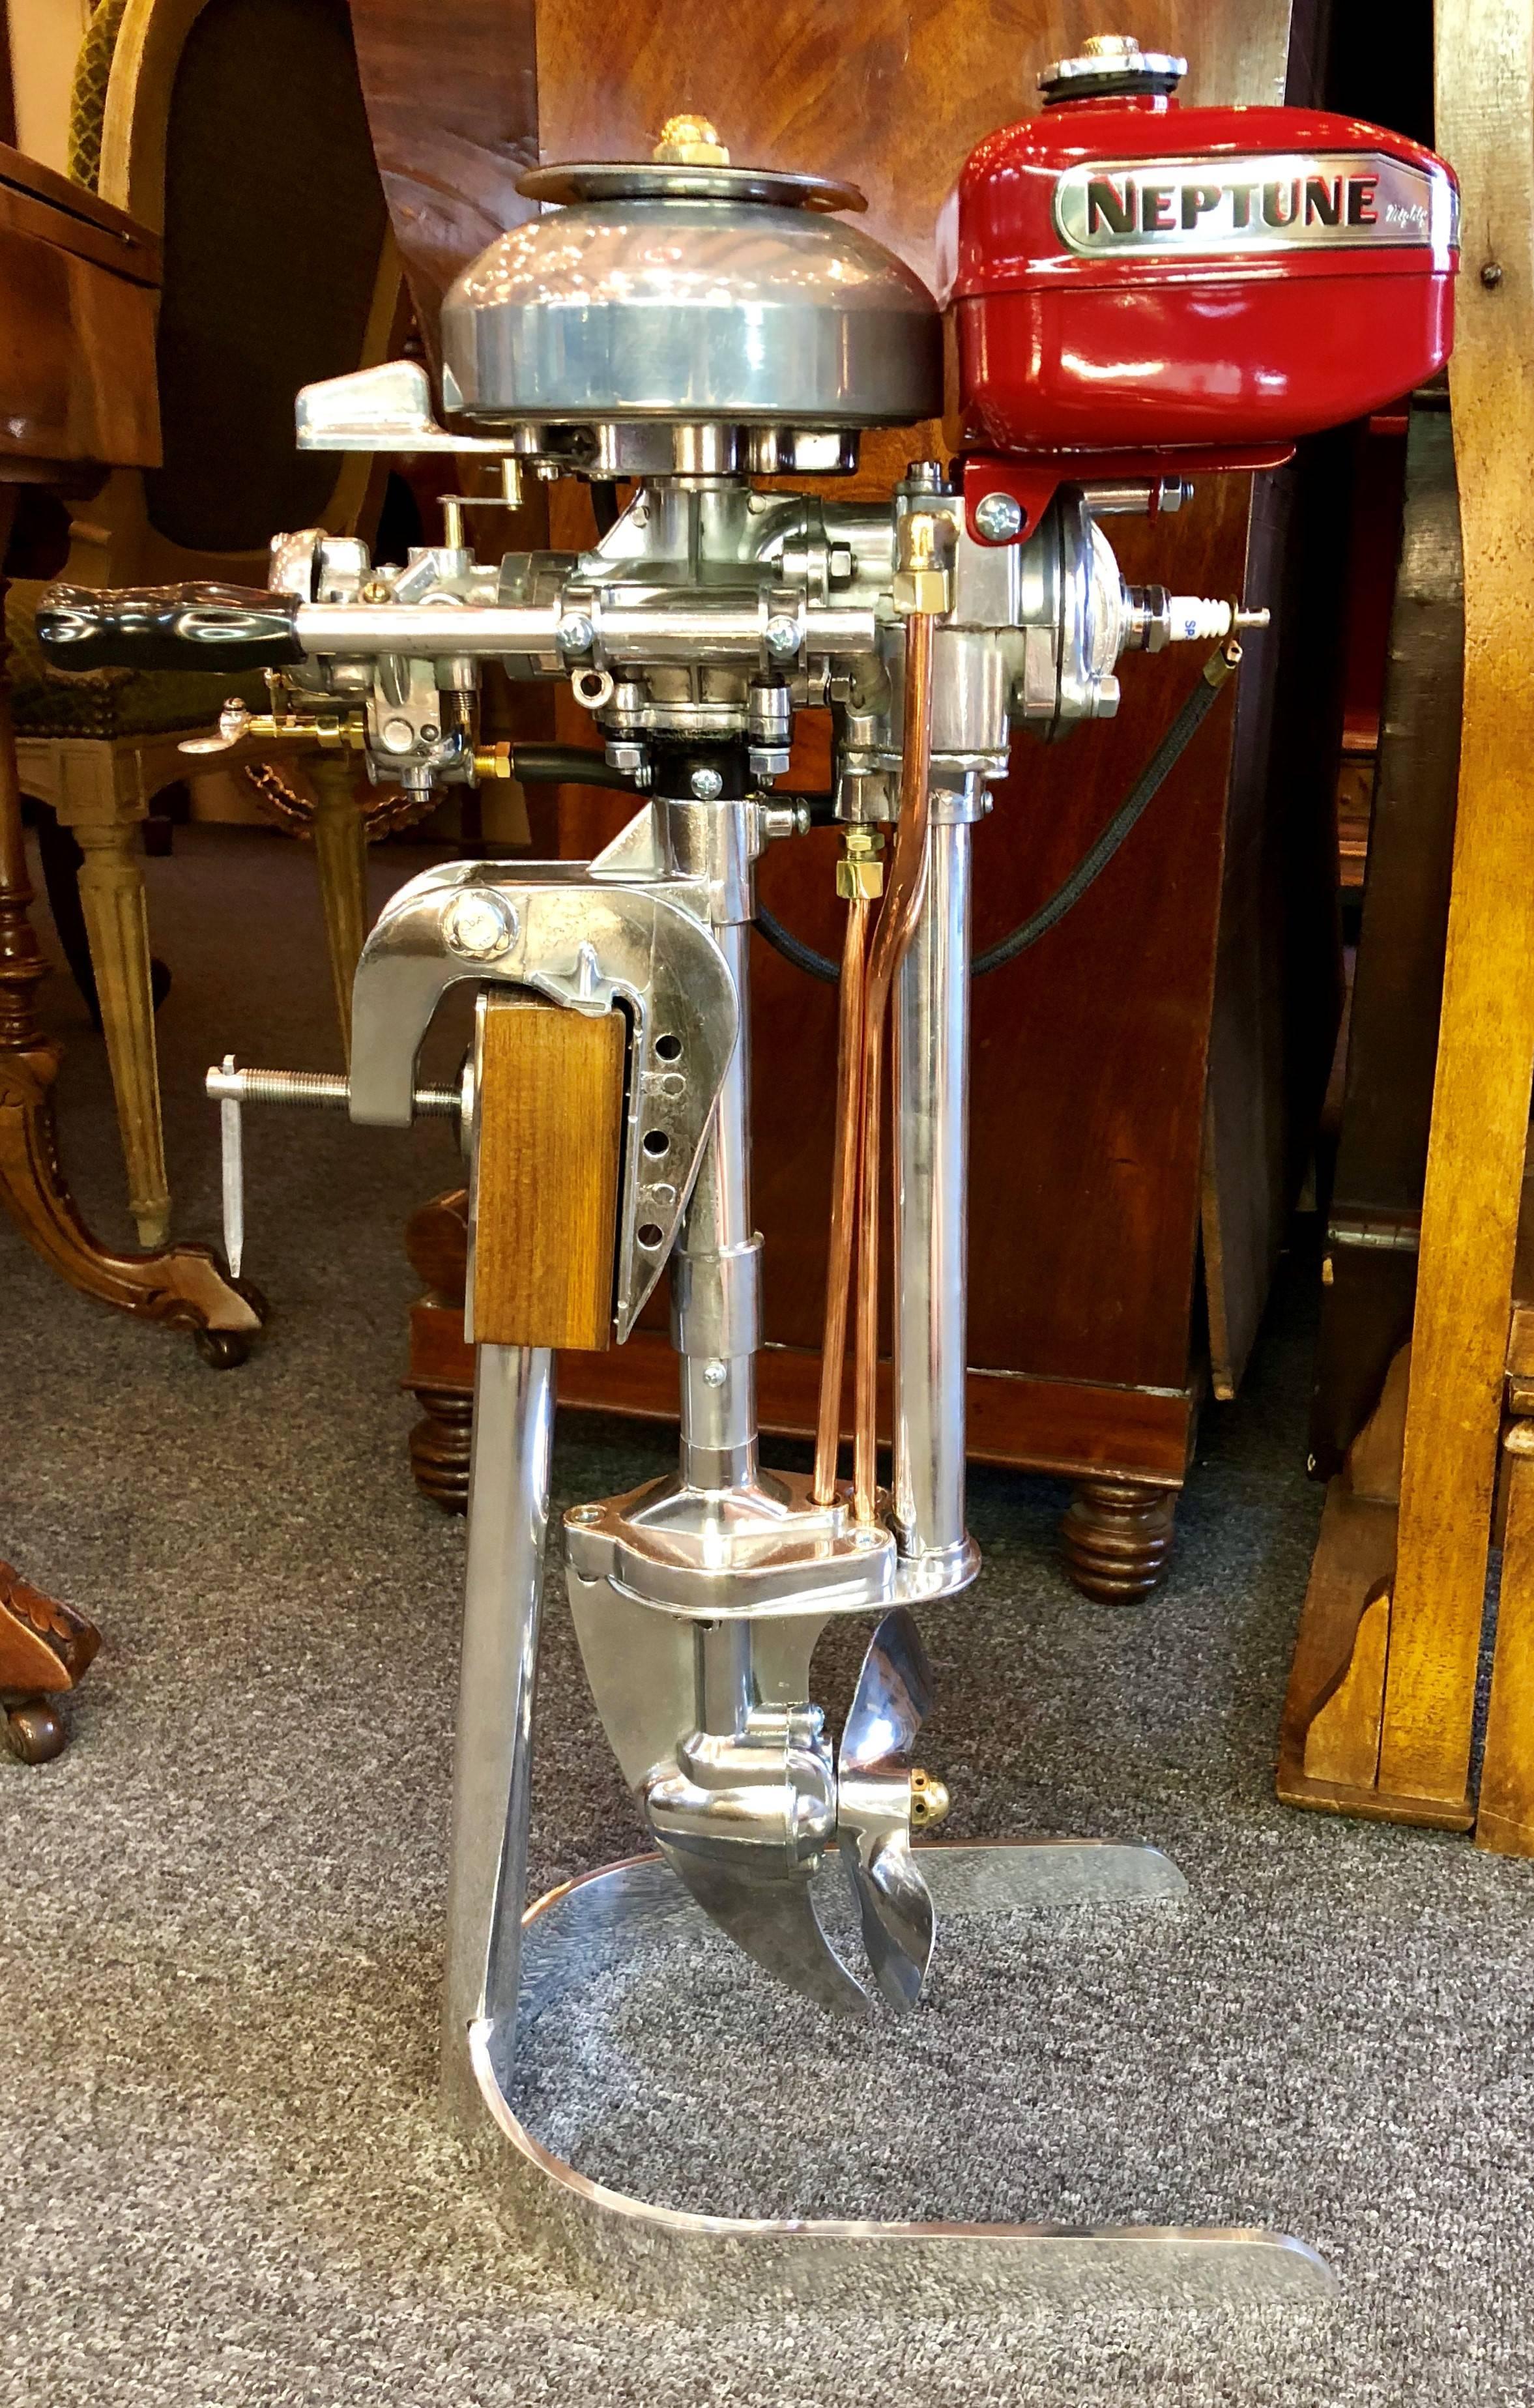 Estate American mighty mite outboard motor mounted on custom-made stand, circa 1950-1960.
Base is 12